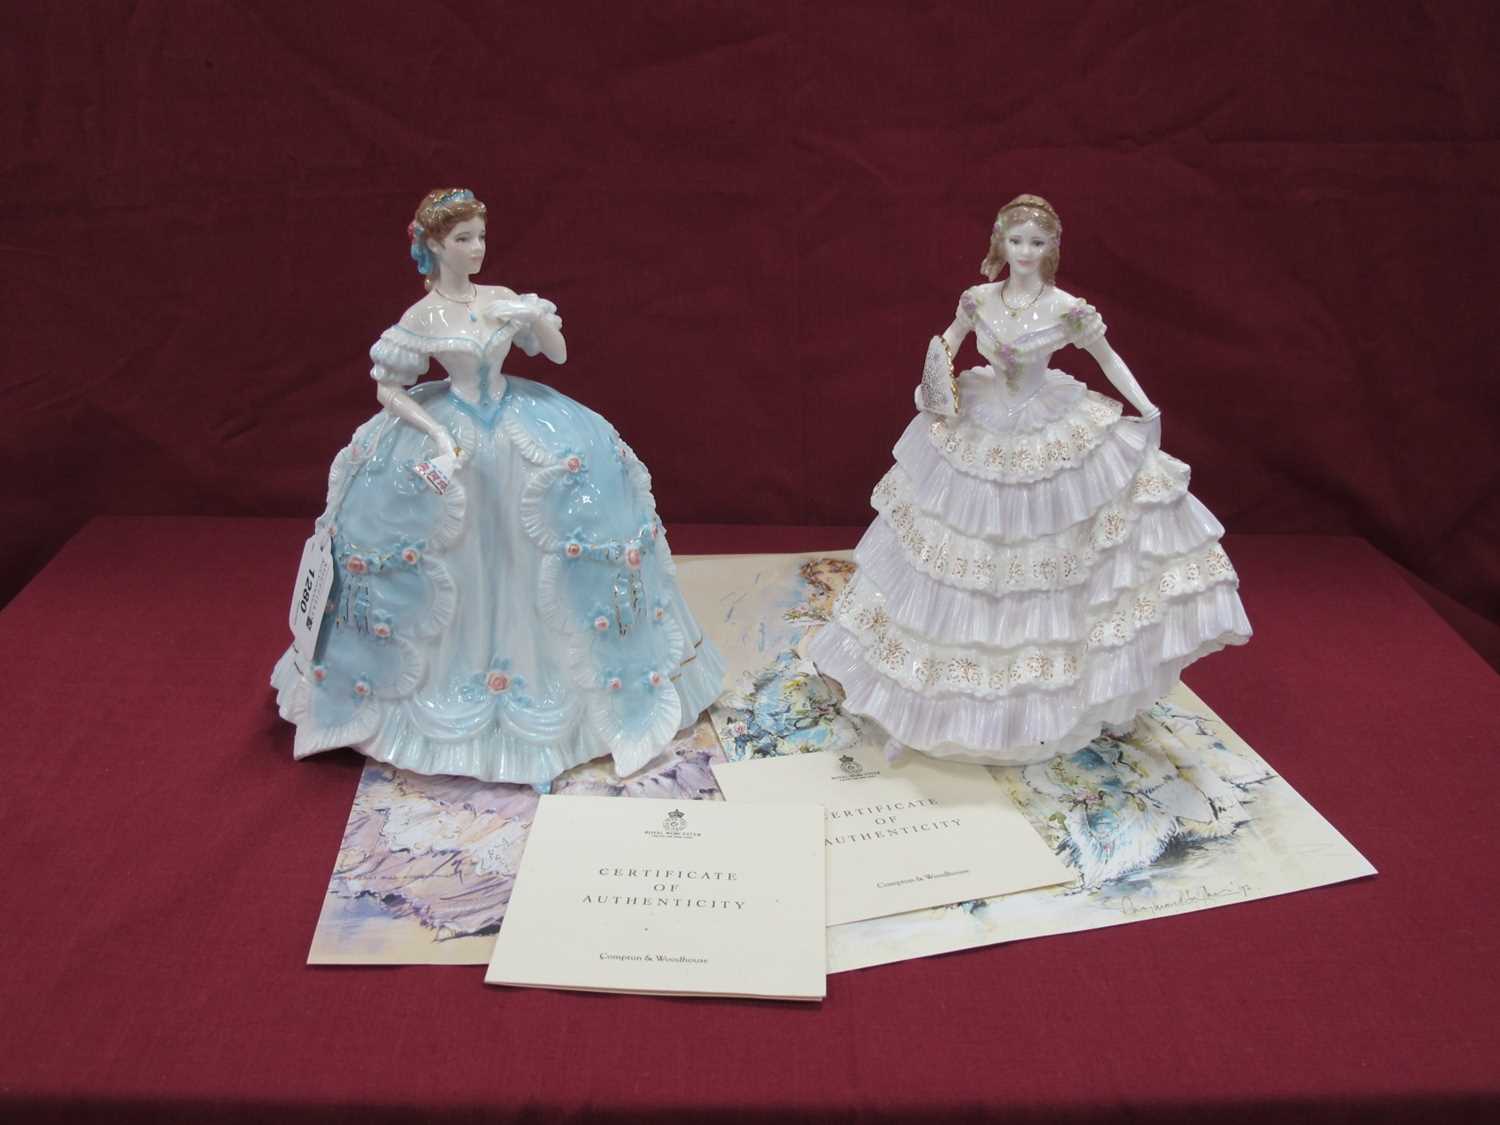 Royal Worcester Figurines 'The First Quadrille' and 'The Belle of The Ball' each limited edition